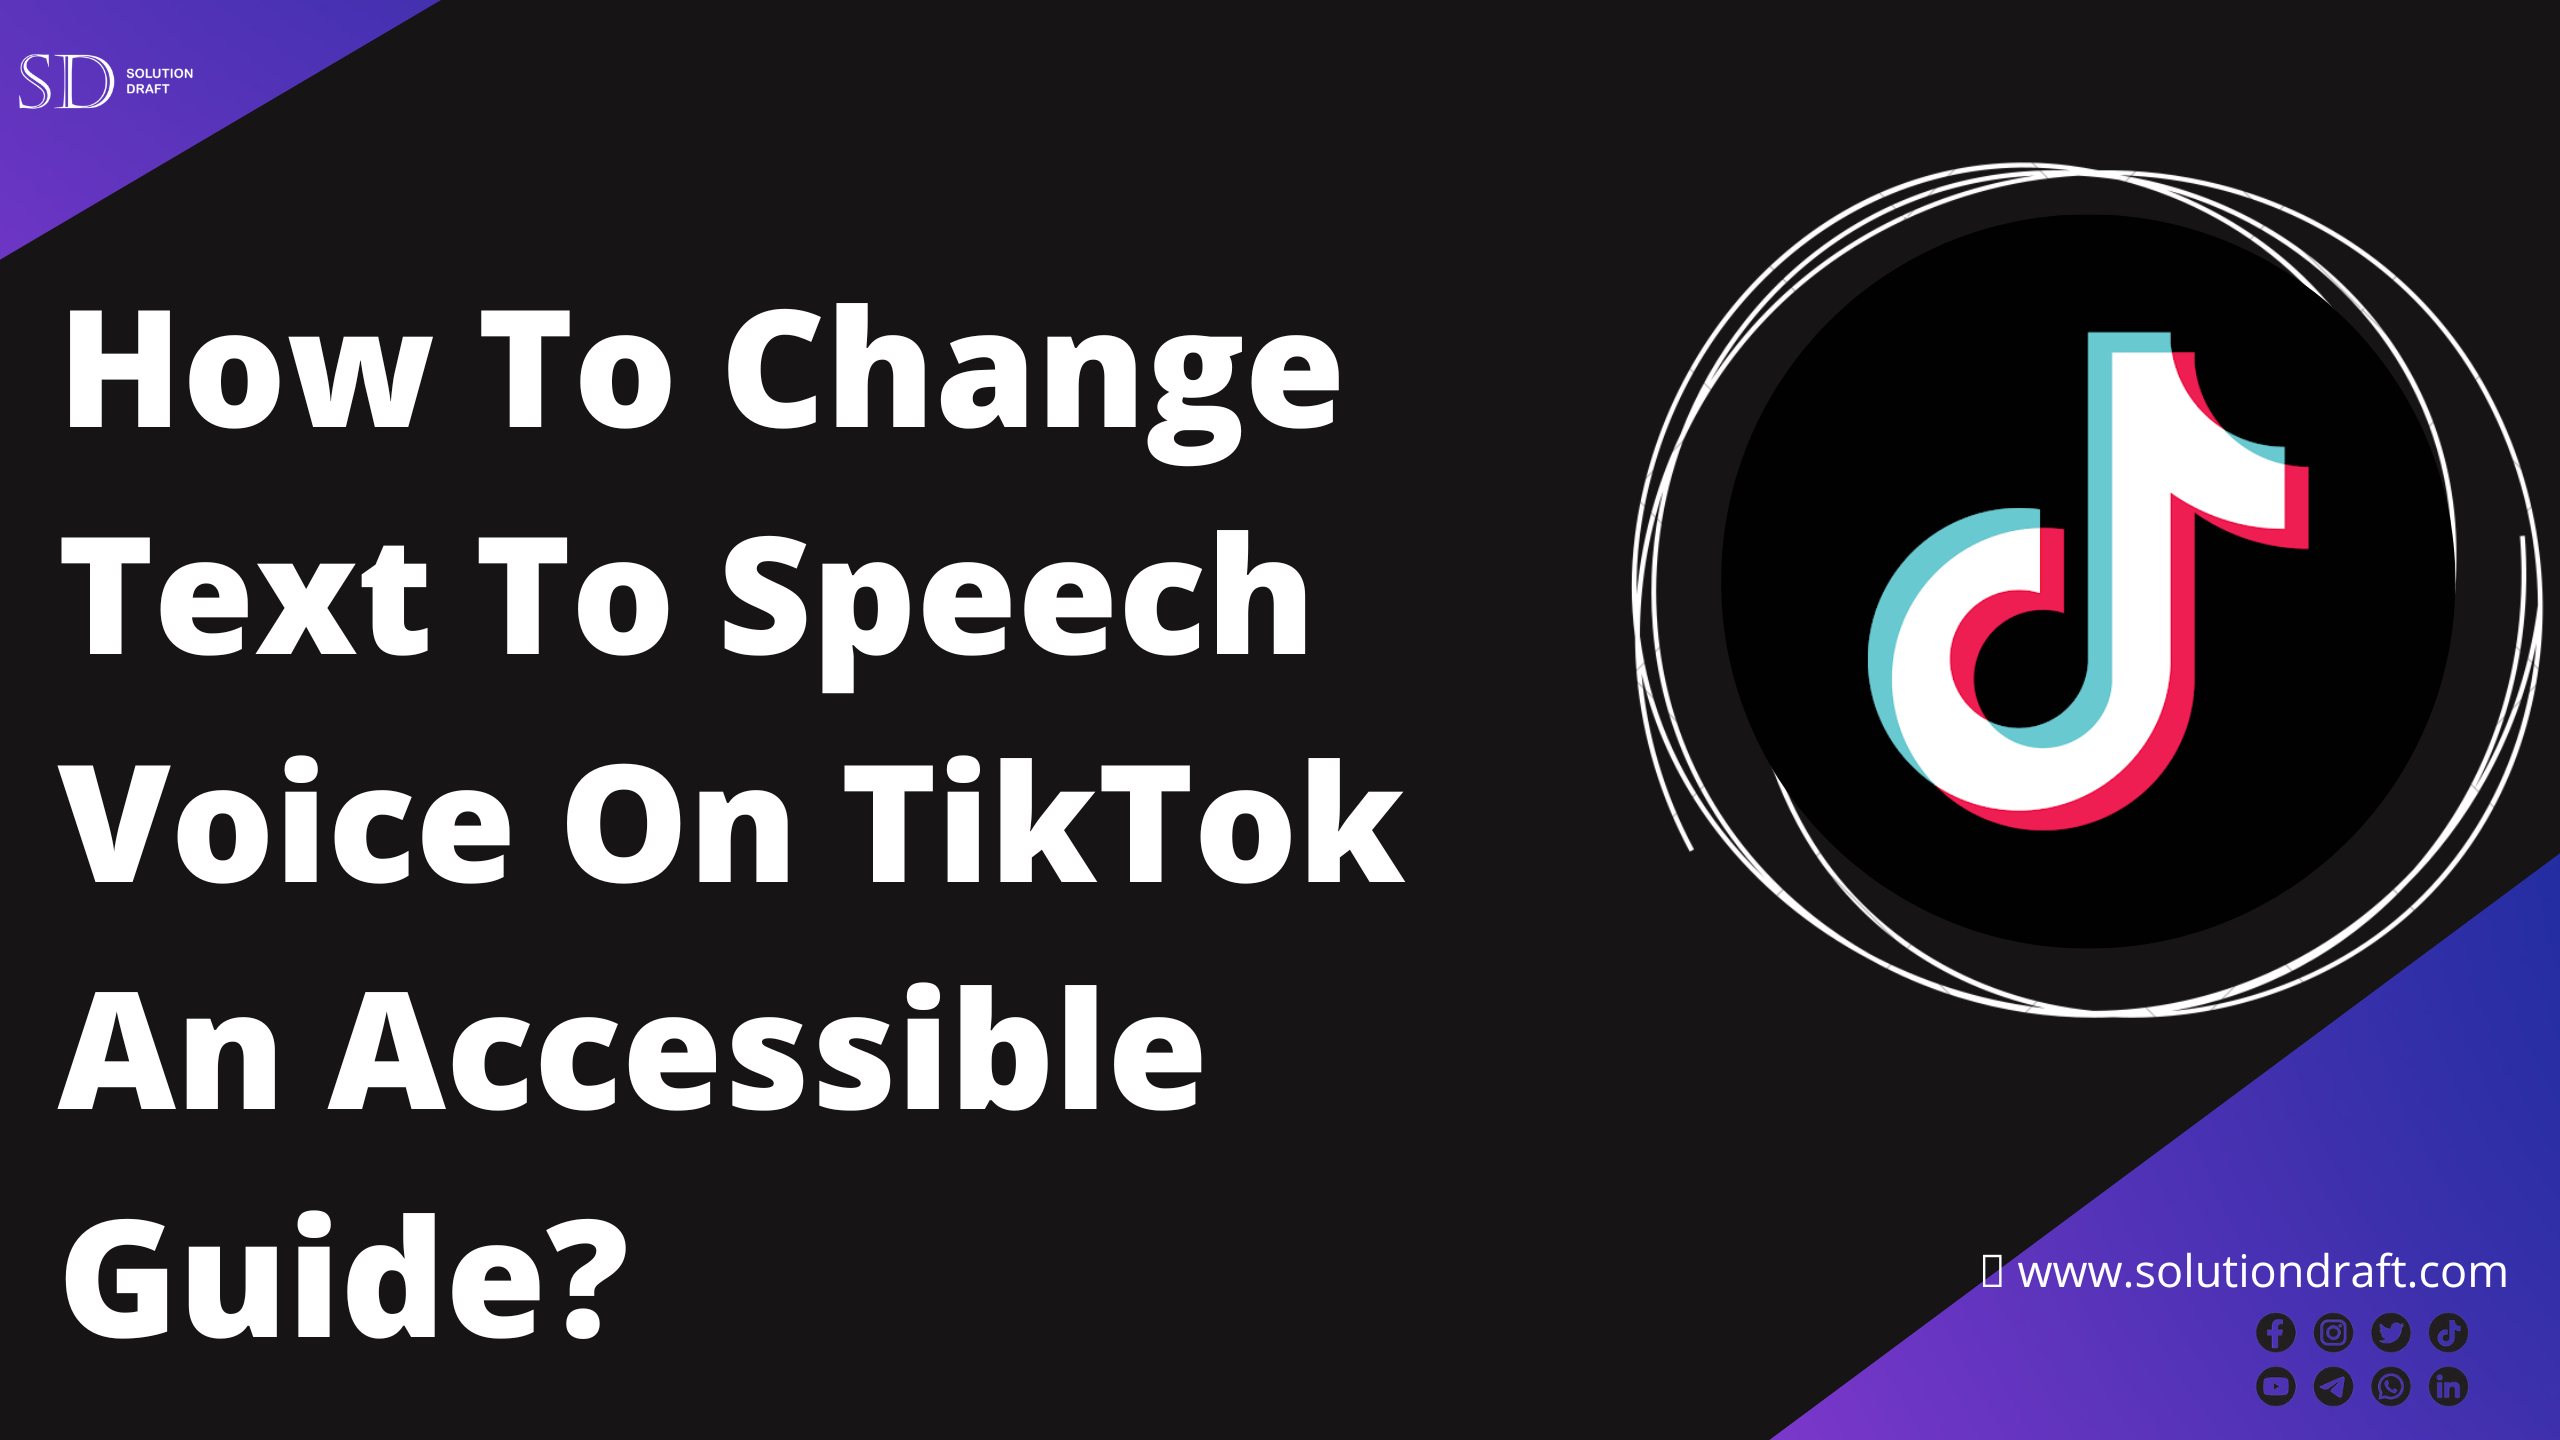 how to change text to speech voice on TikTok an accessible guide?